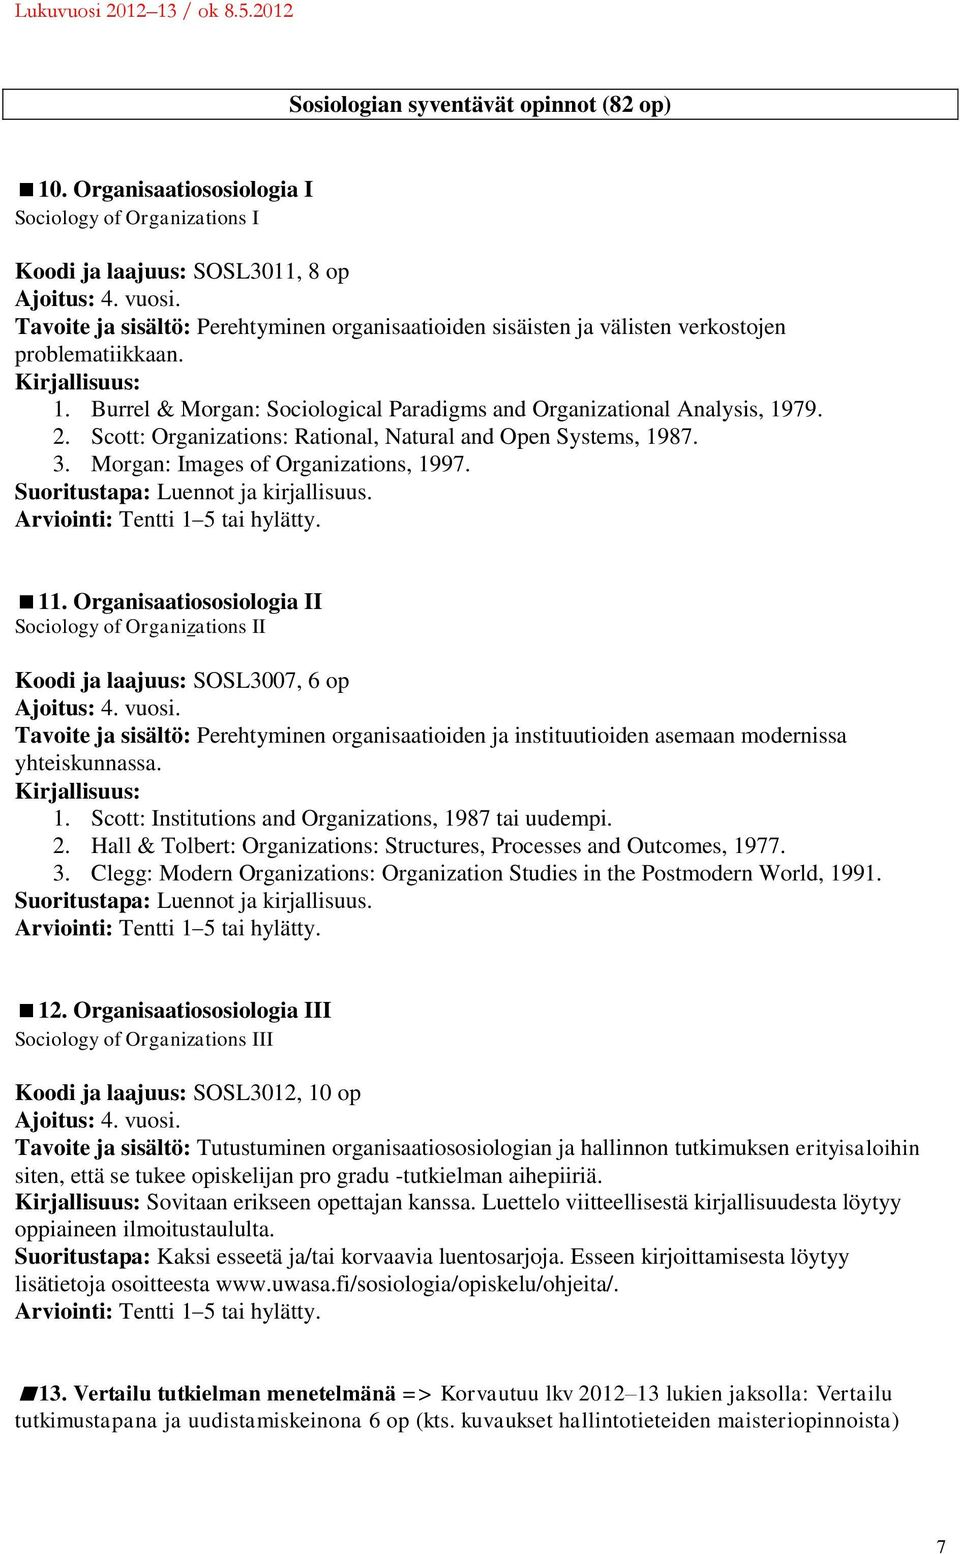 Scott: Organizations: Rational, Natural and Open Systems, 1987. 3. Morgan: Images of Organizations, 1997. 11.